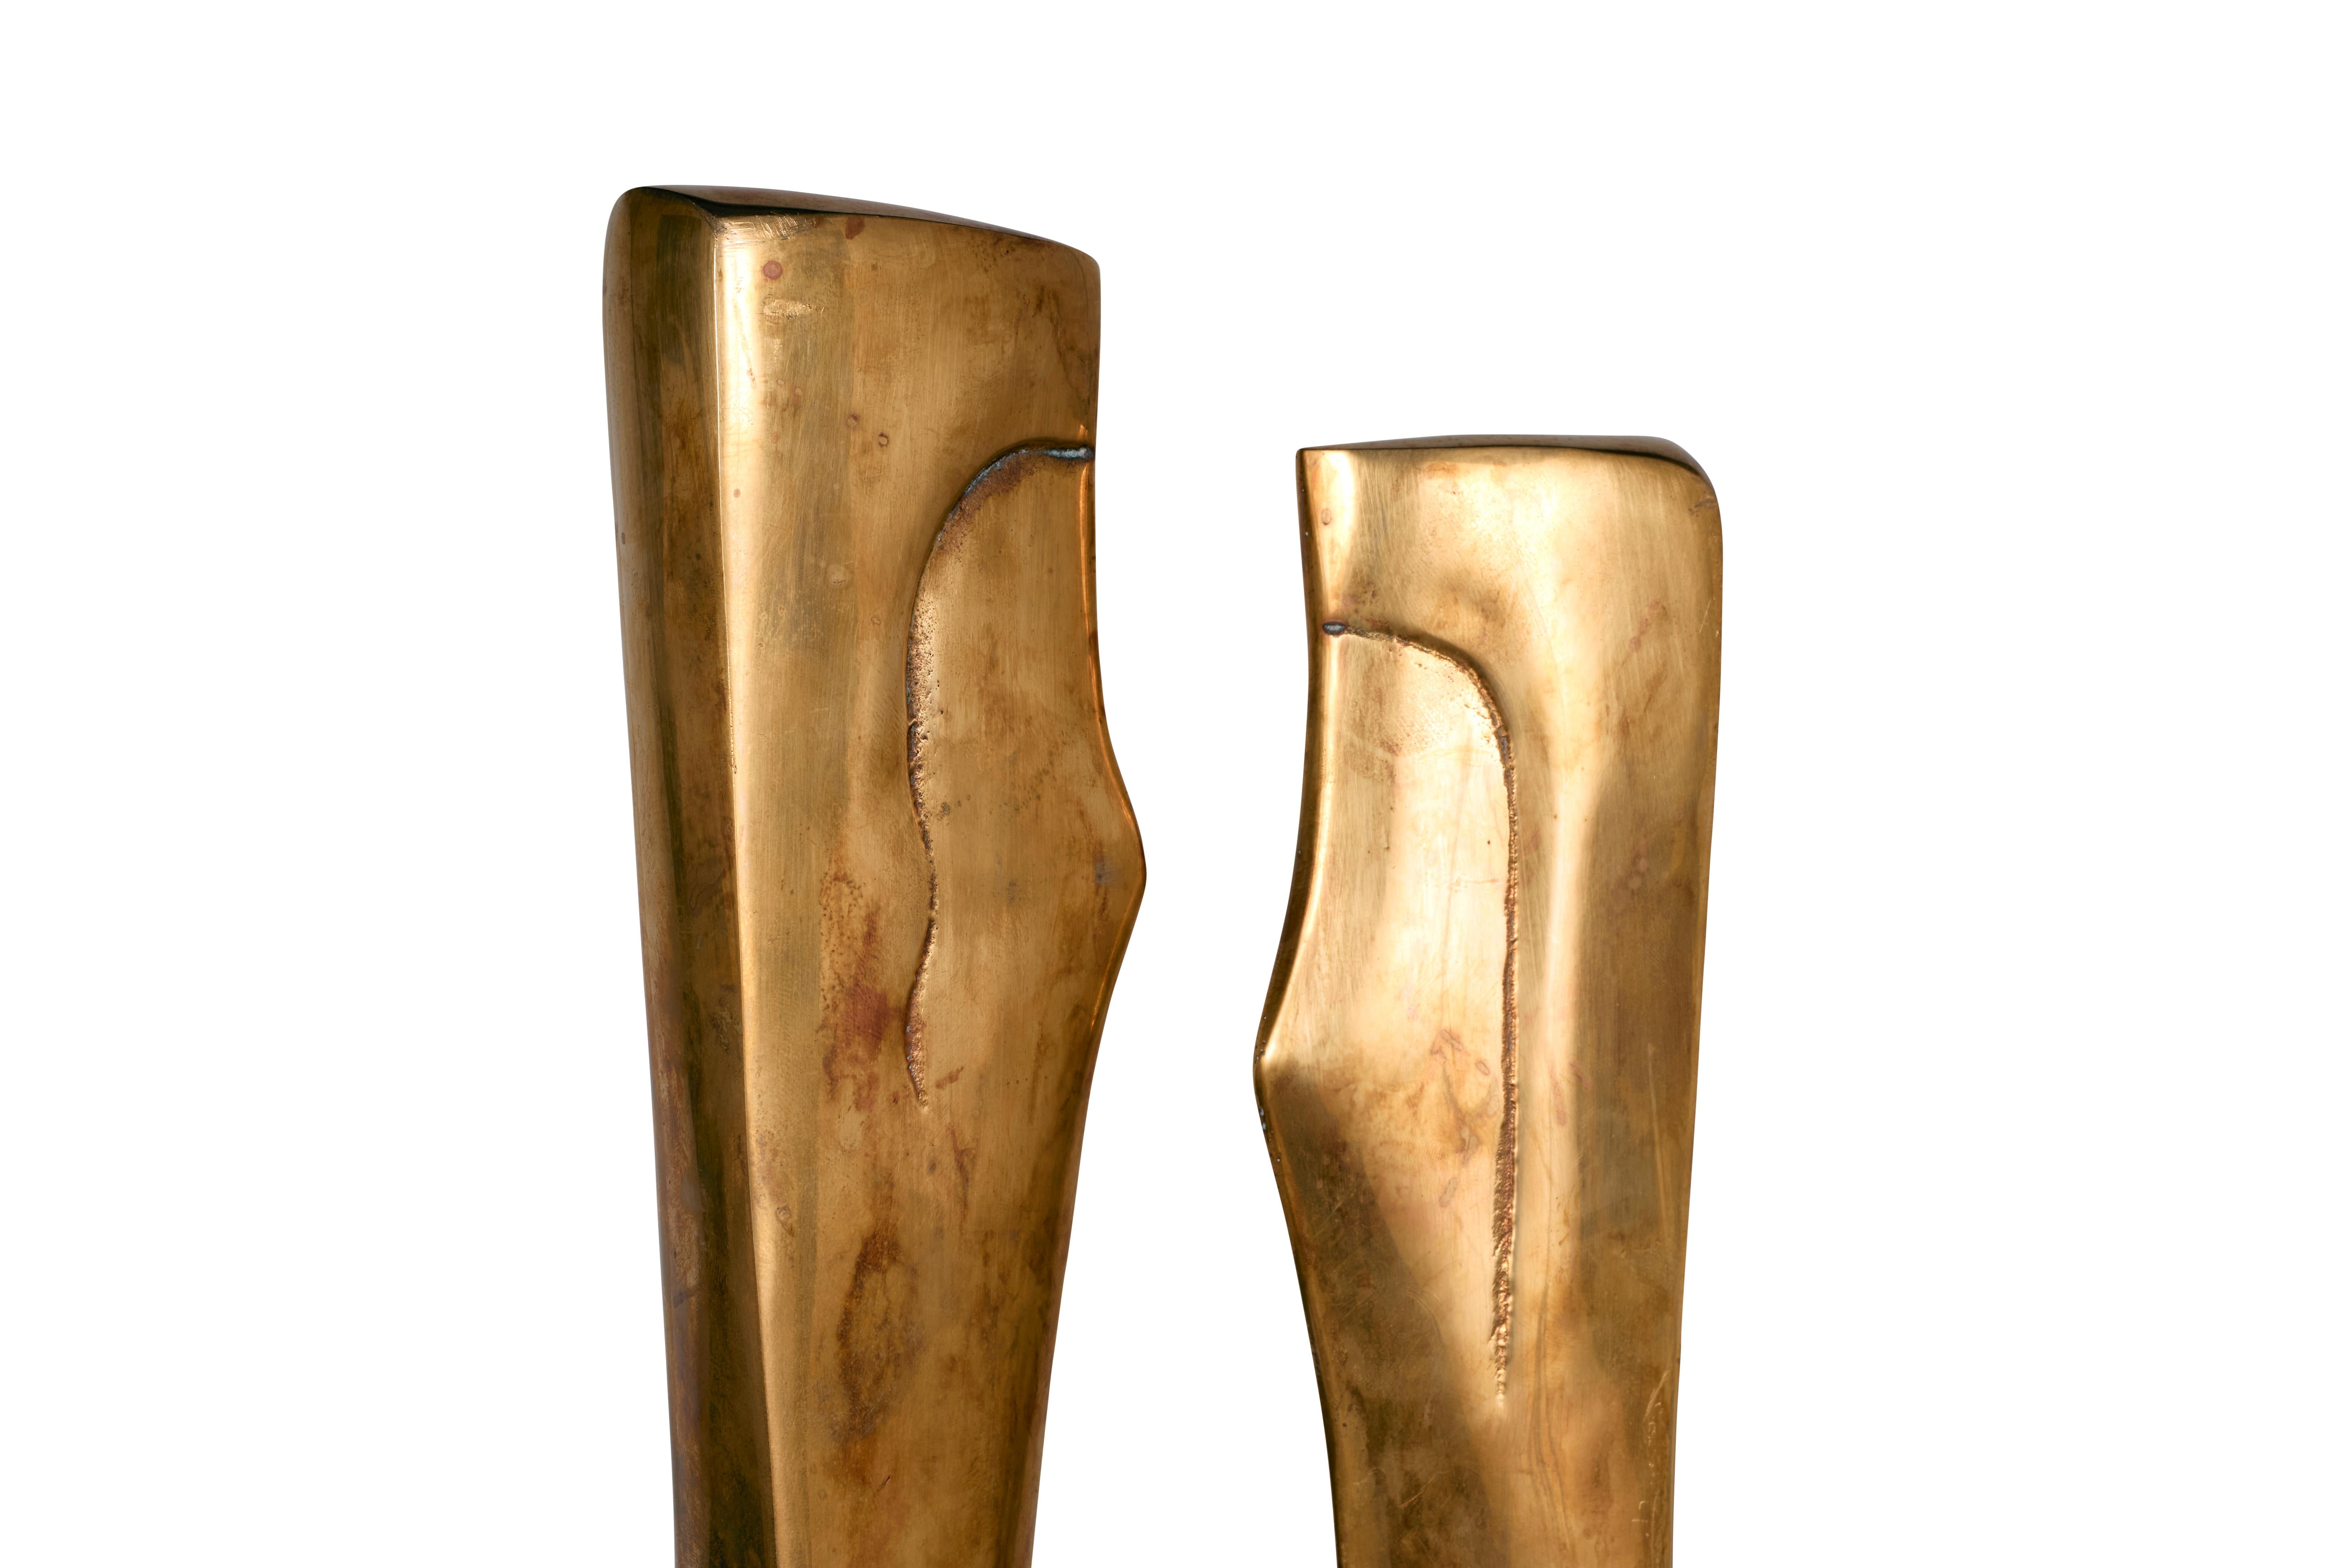 Modernist Brass Sculpture Depicting Faces  In Good Condition For Sale In Dallas, TX